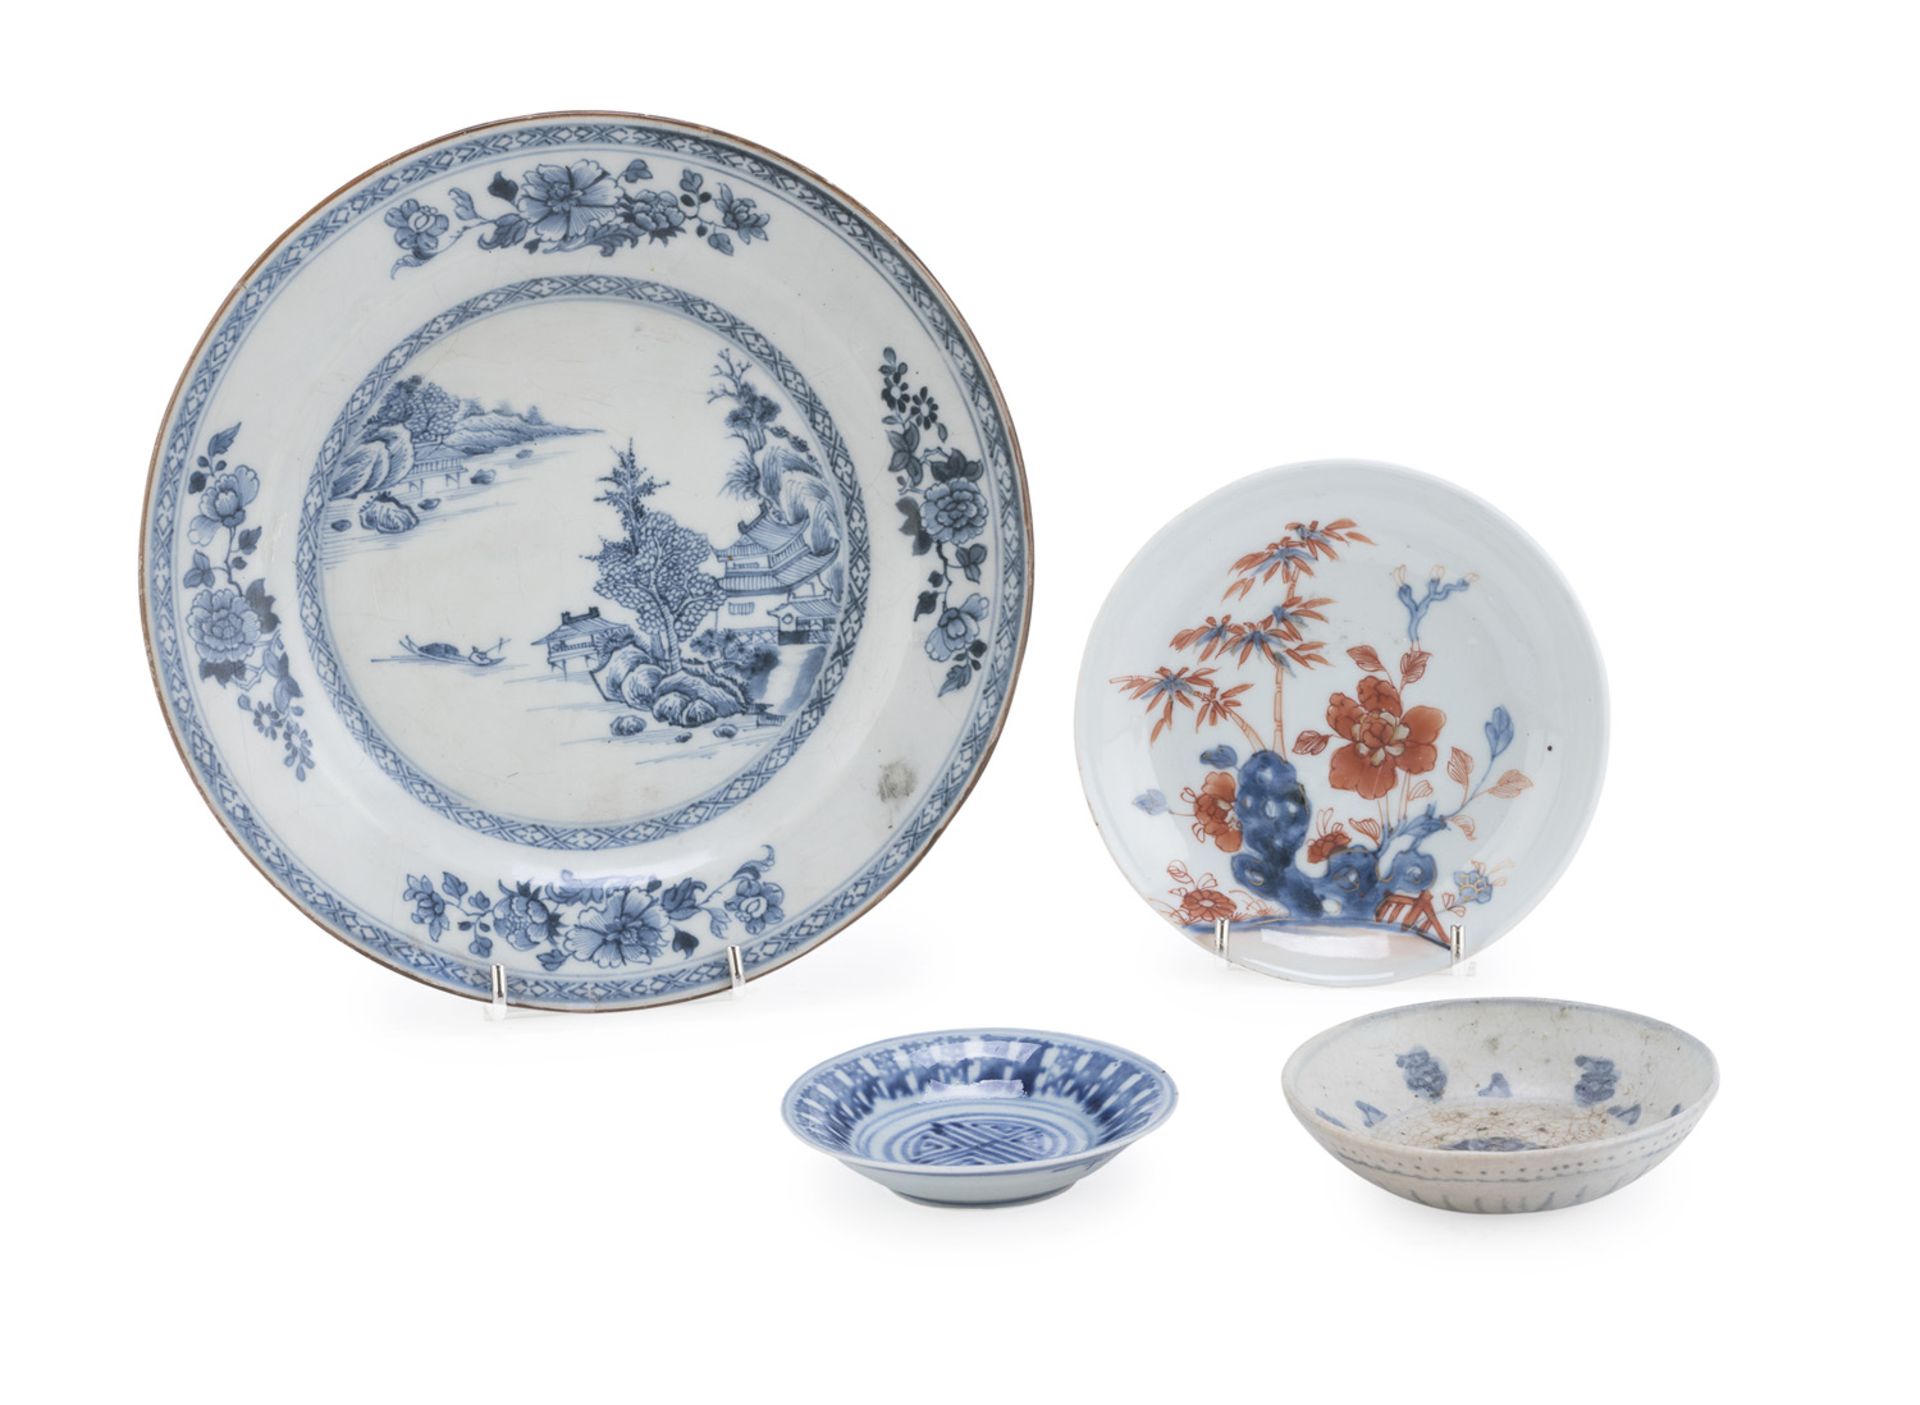 FOUR PORCELAIN PLATES CHINA 18th - 19th CENTURY